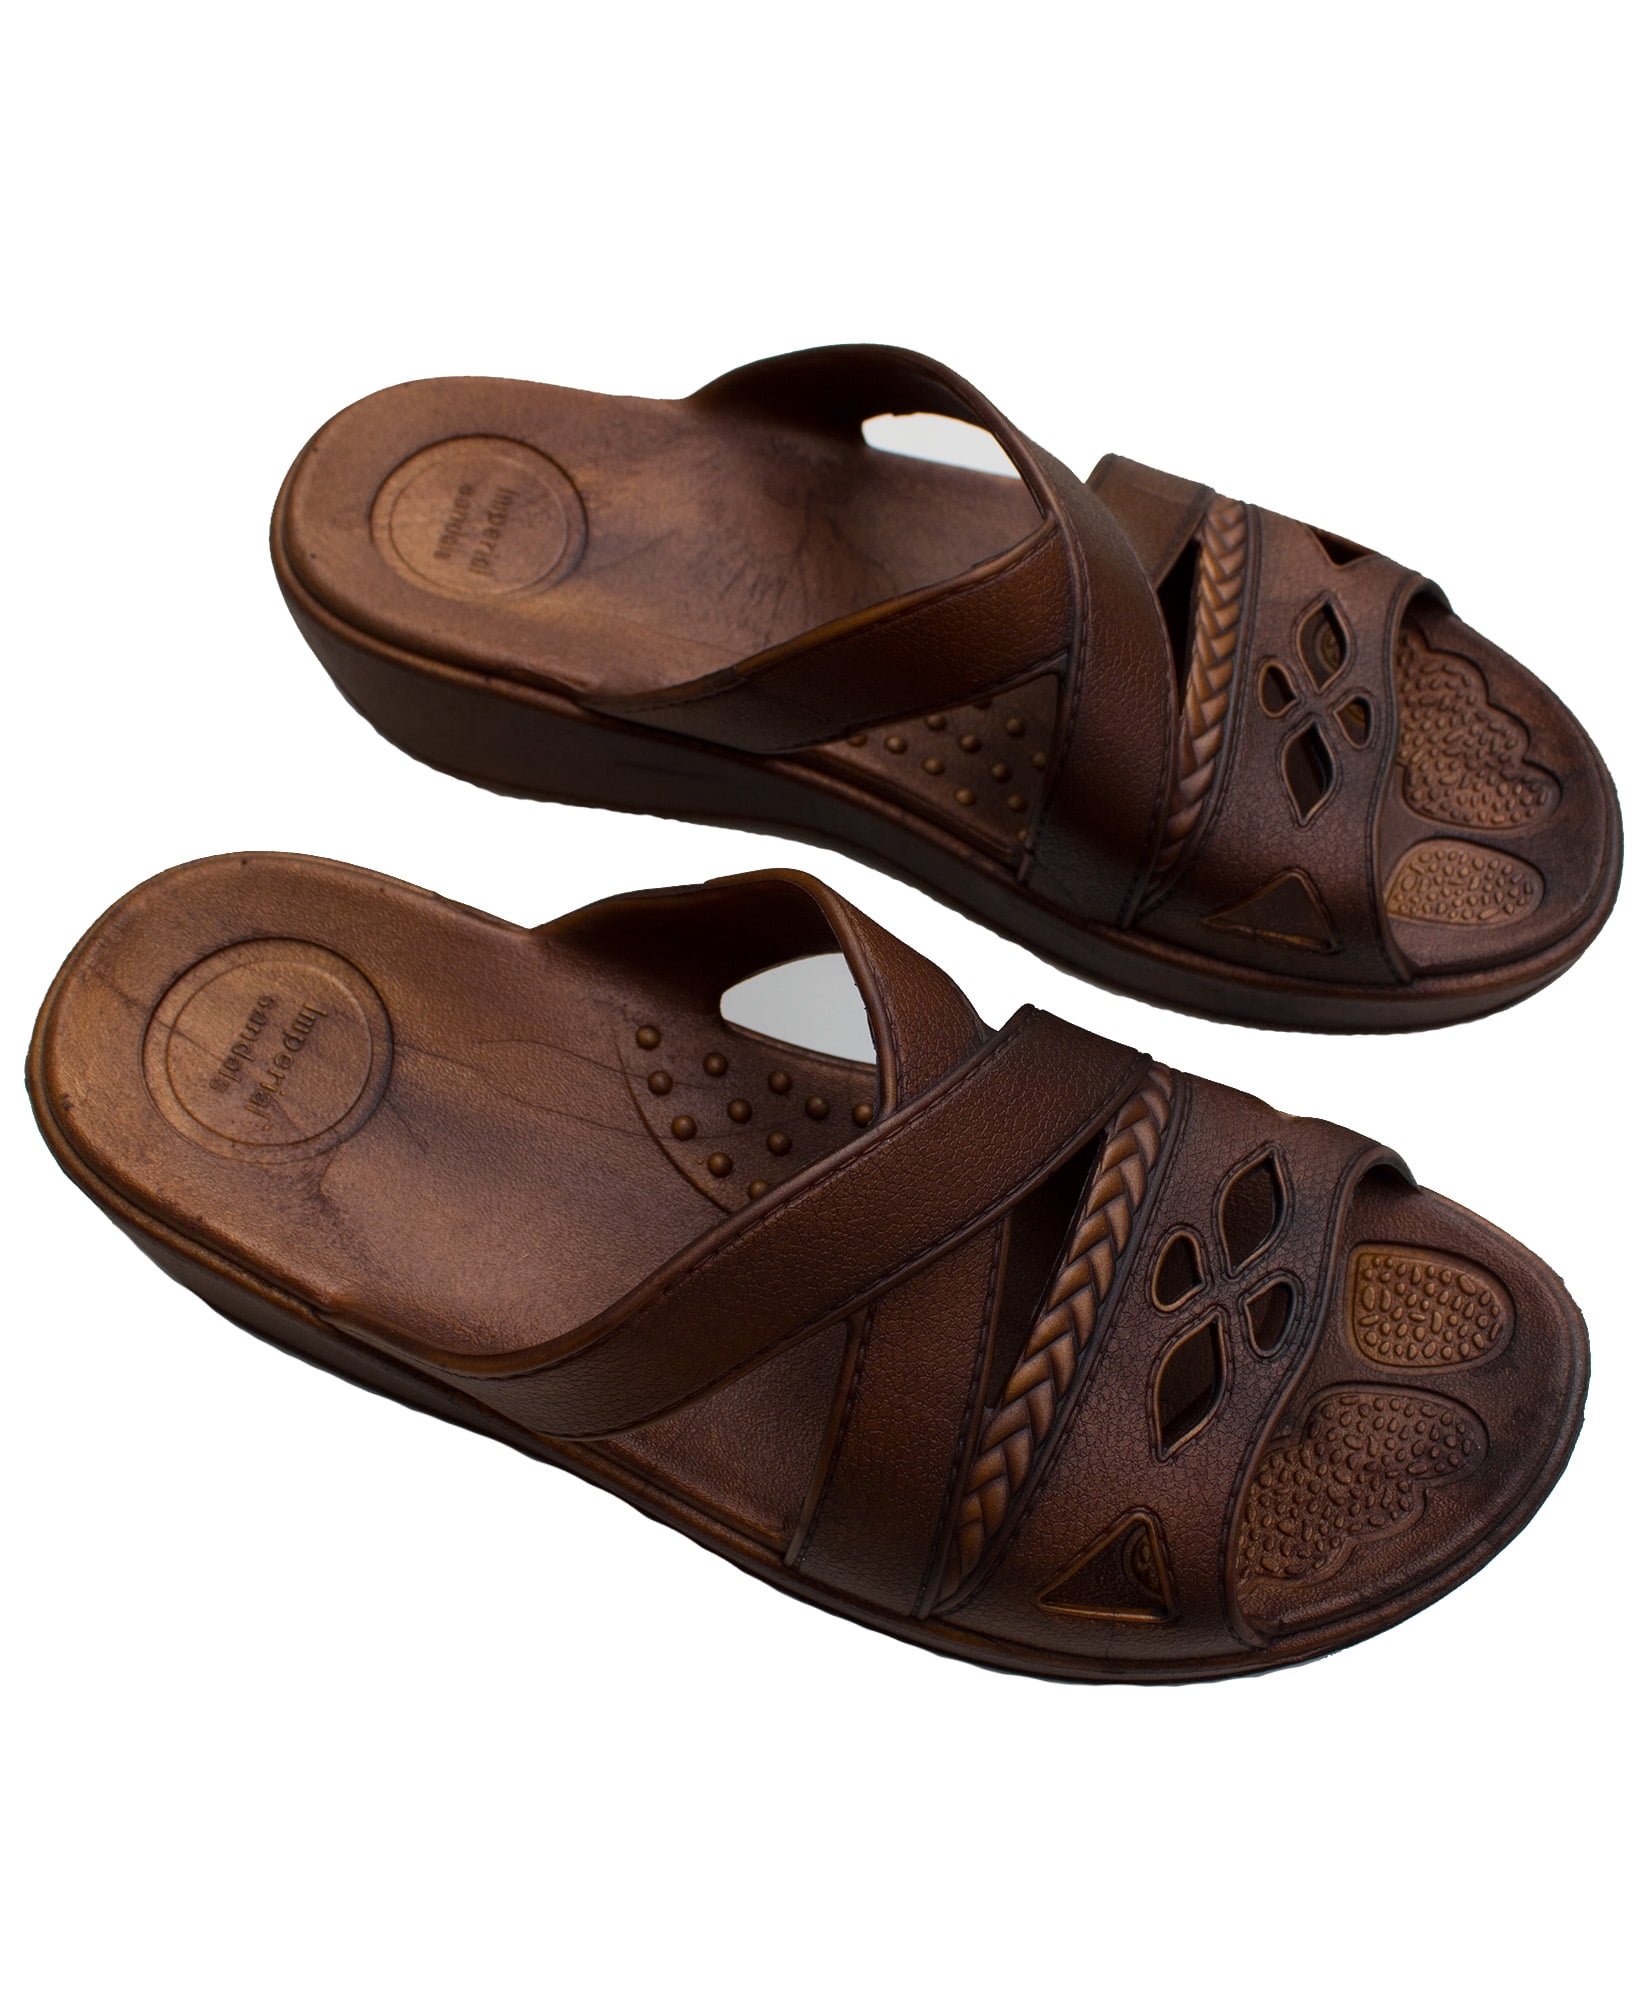 Imperial Sandals  Hawaii Womens Comfort and Stylish 